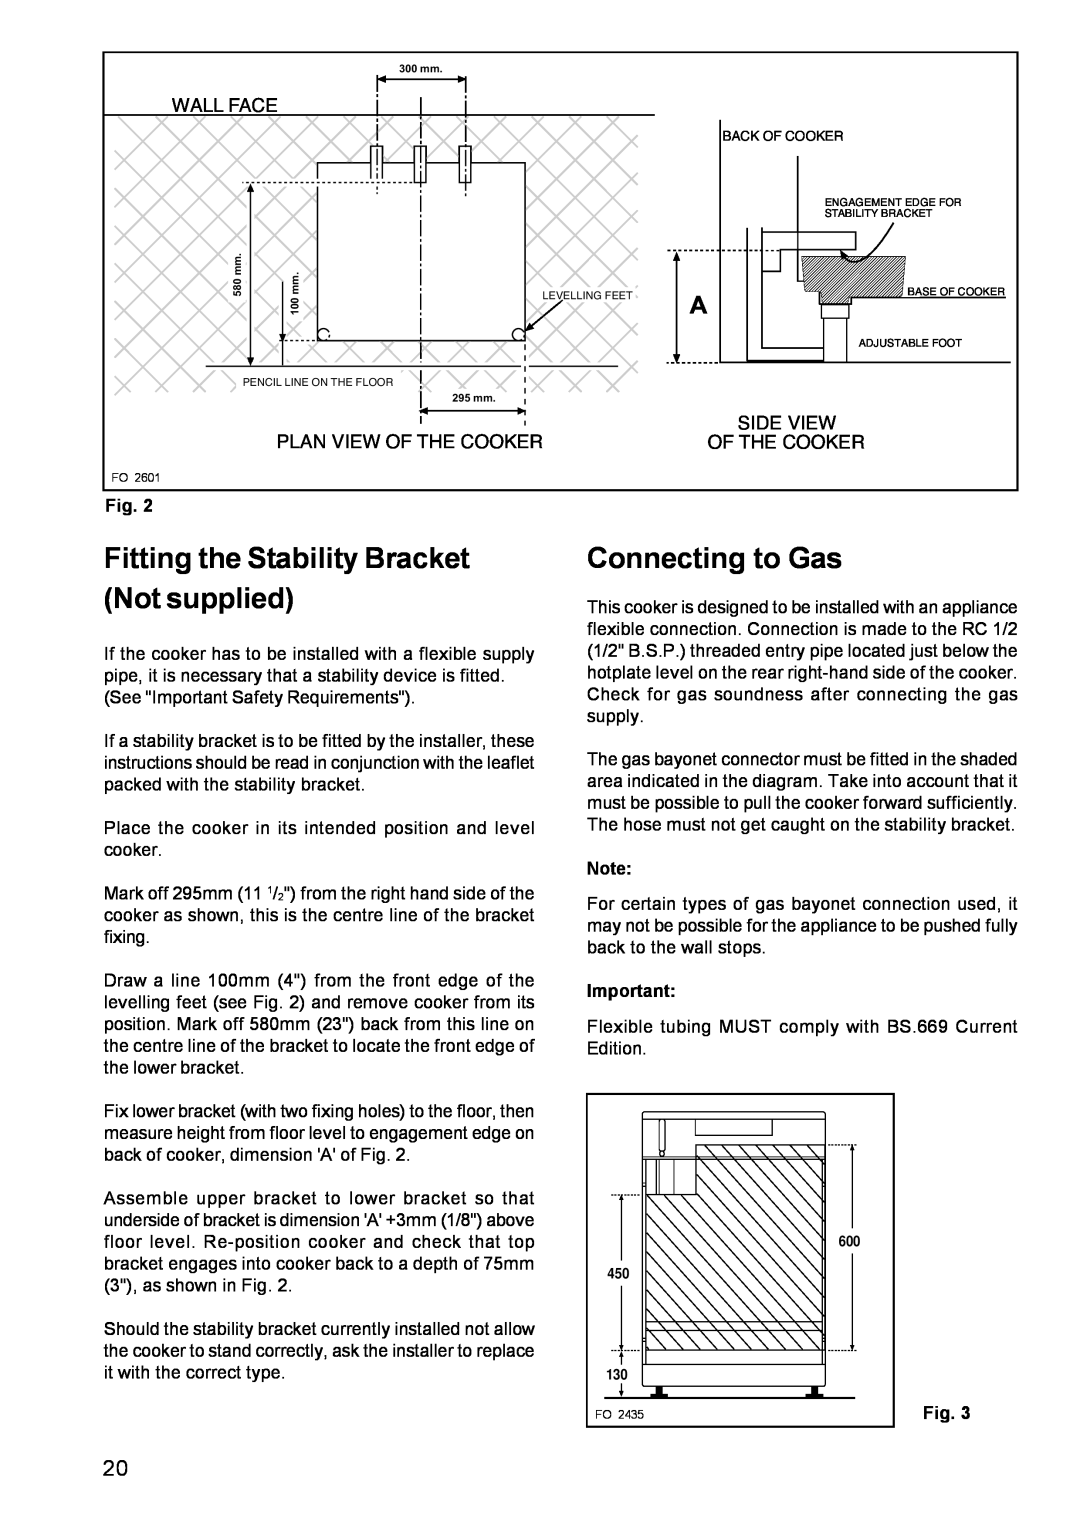 Electrolux CSIG 509 Fitting the Stability Bracket Not supplied, Connecting to Gas, Wall Face, Plan View Of The Cooker 